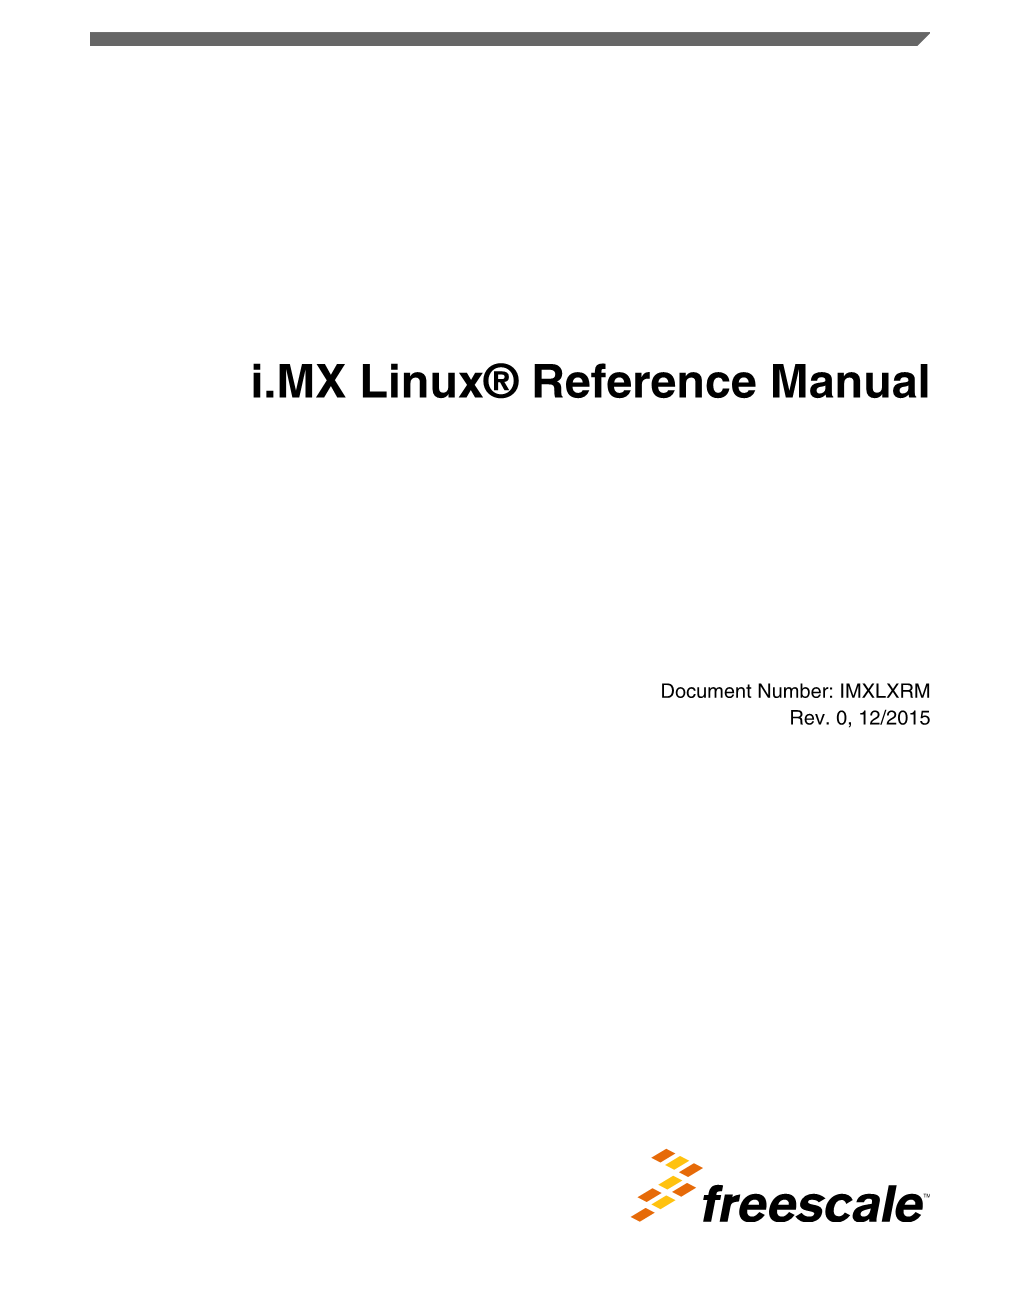 I.MX Linux® Reference Manual